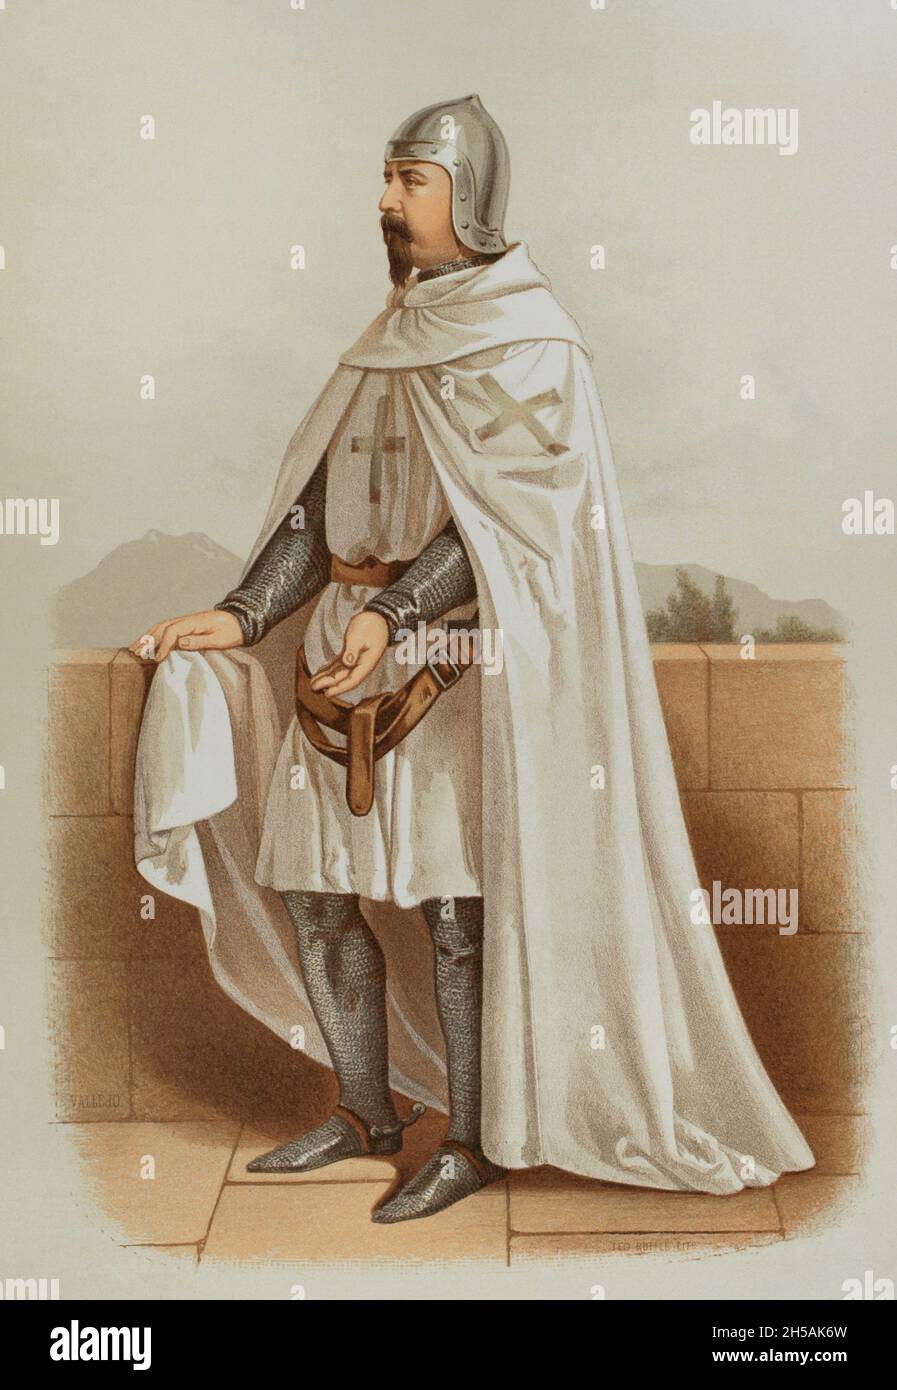 Knight of the Order of San Julian del Pereiro wearing war dress. Founded in Portugal in 1093 with the name of Order of San Julian del Pereiro. After the relocation of their headquarters to the town of Alcántara, the masters began to be called Maestres de la Orden de Alcántara (Masters of the Order of Alcántara) and no longer used their first name. Historia de las Ordenes de Caballería y de las Condecoraciones Españolas (History of the Orders of Chivalry and the Spanish Decorations). Madrid, 1865. Spain. Stock Photo